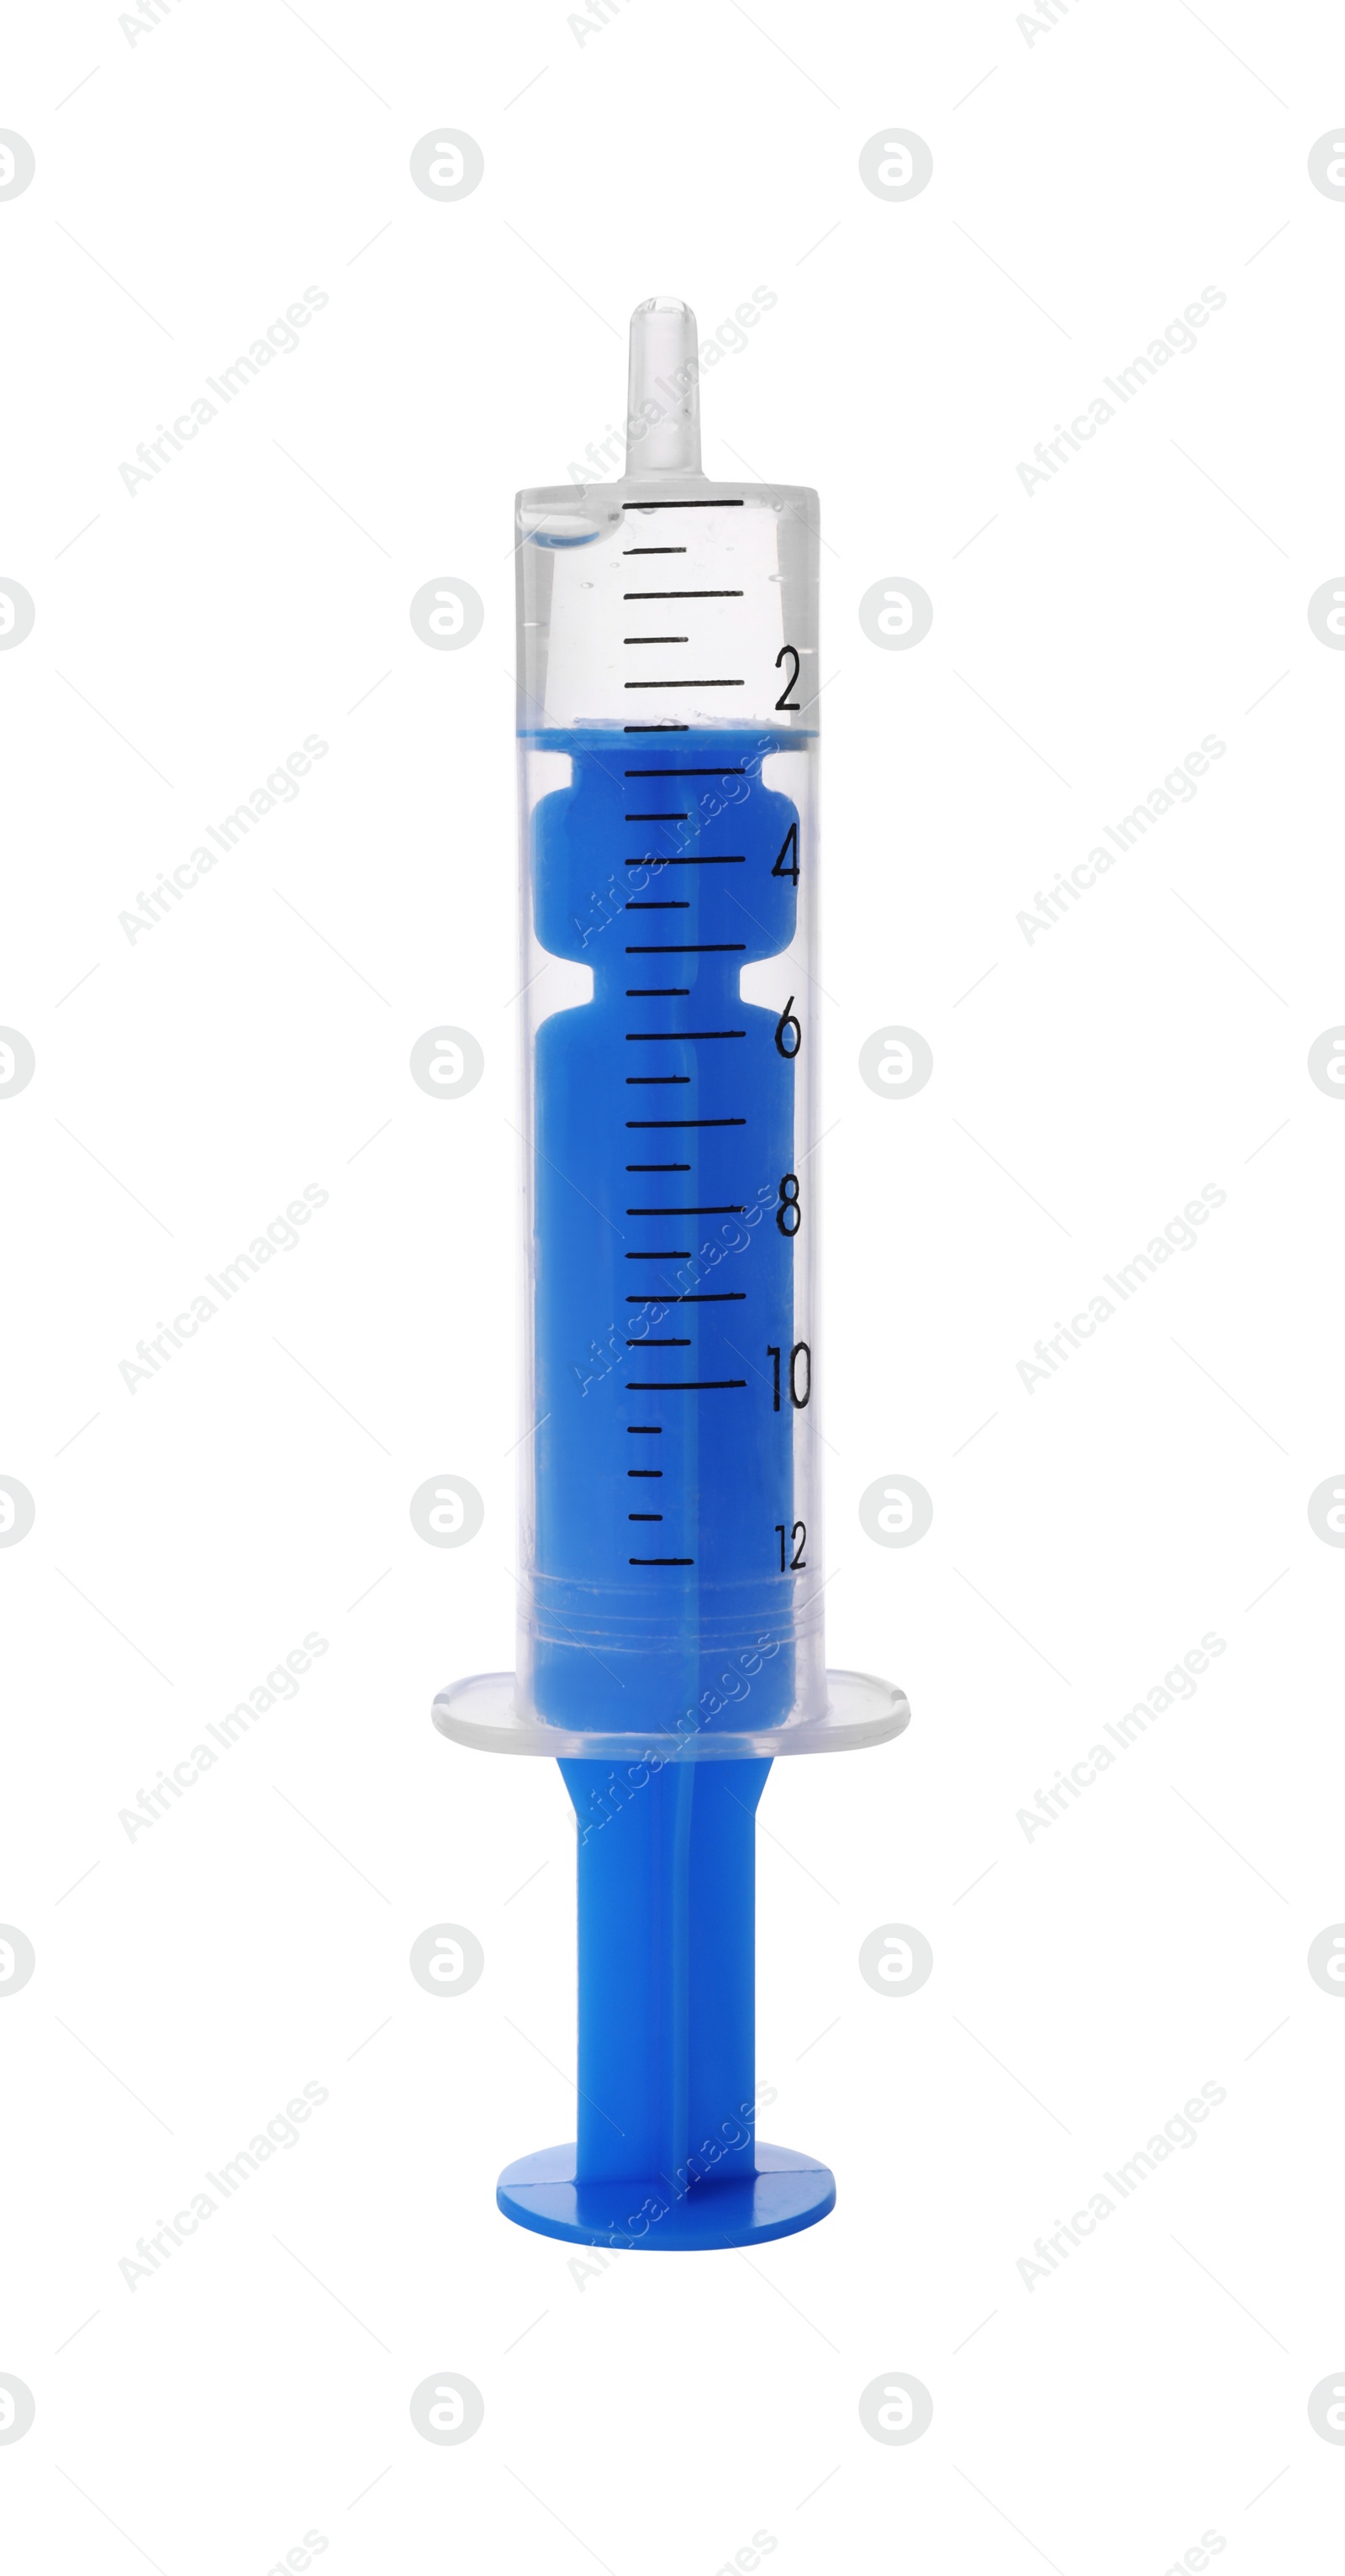 Photo of Disposable syringe with medicine isolated on white